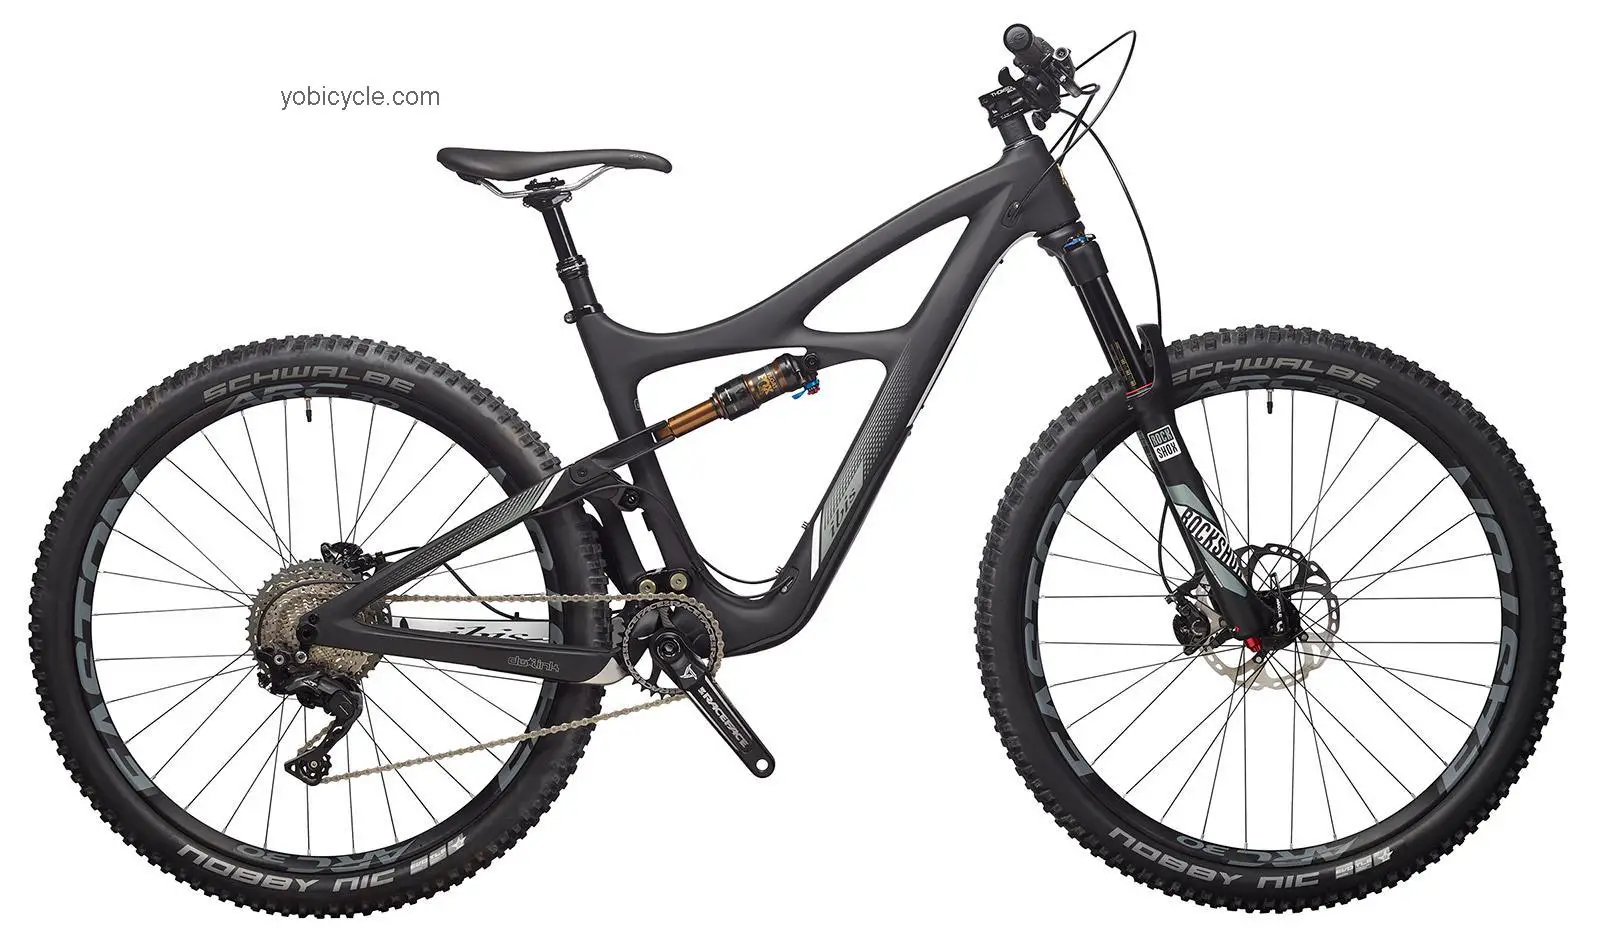 Ibis Mojo 3 X01 Eagle competitors and comparison tool online specs and performance